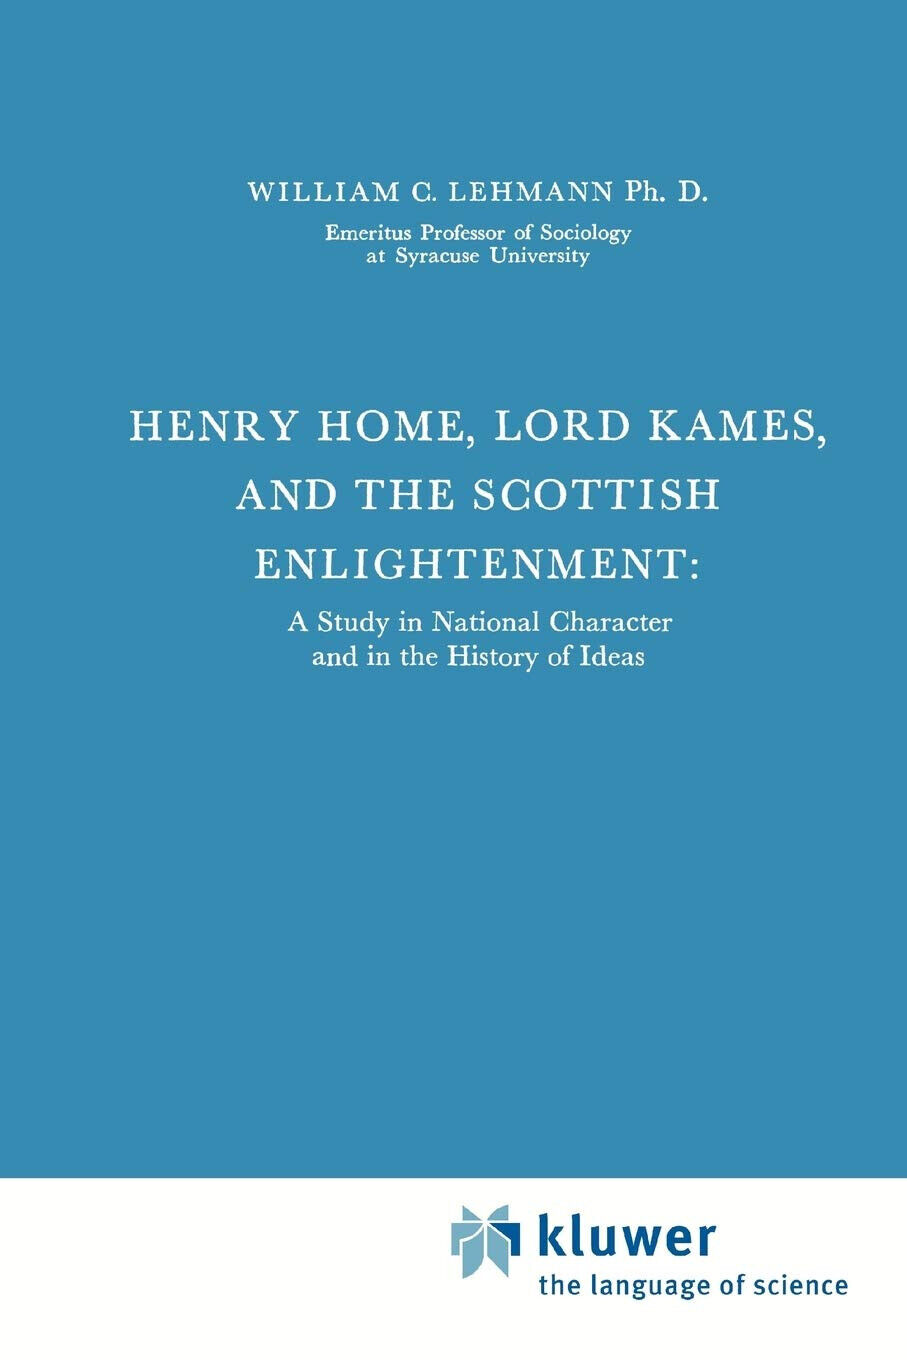 Henry Home, Lord Kames and the Scottish Enlightenment - William C. Lehmann- 2010 libro usato